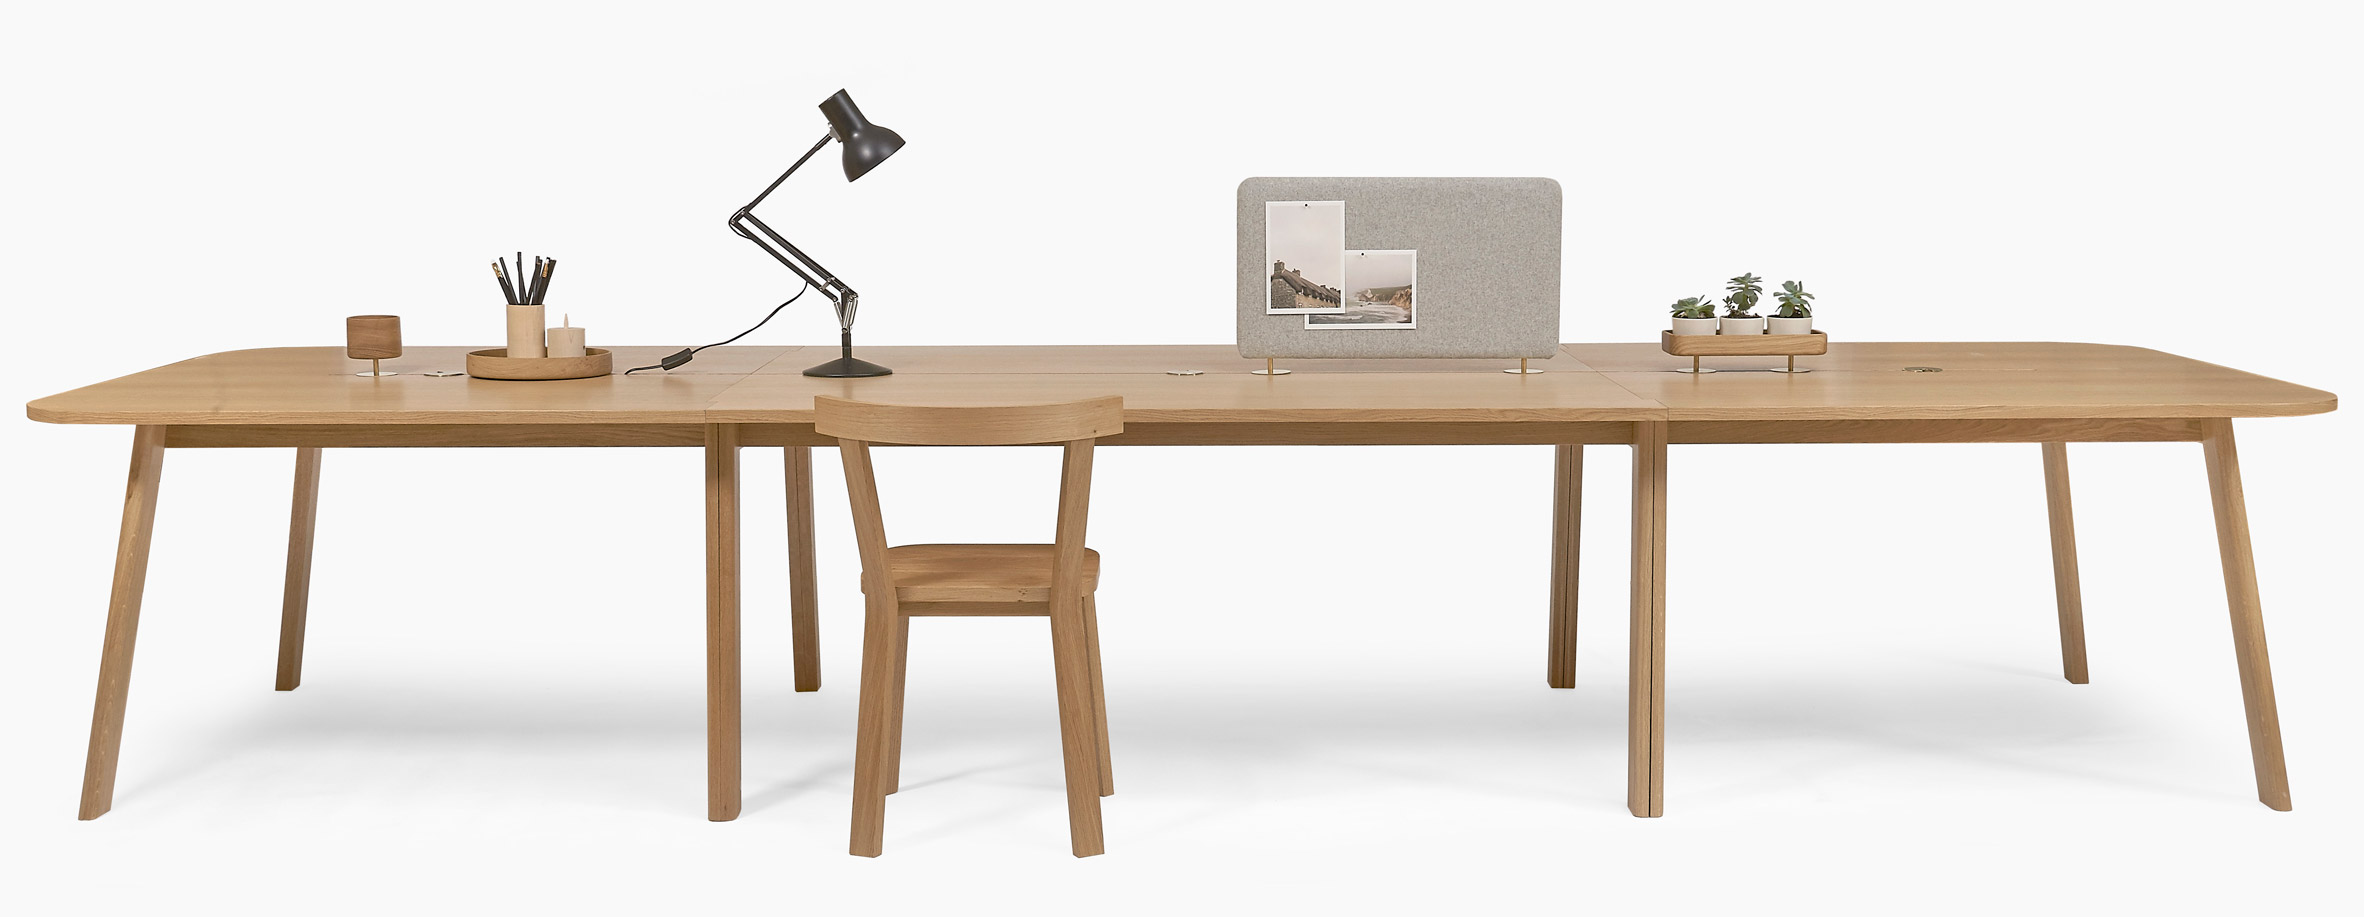 Another Country launches furniture designed to make offices feel more like home